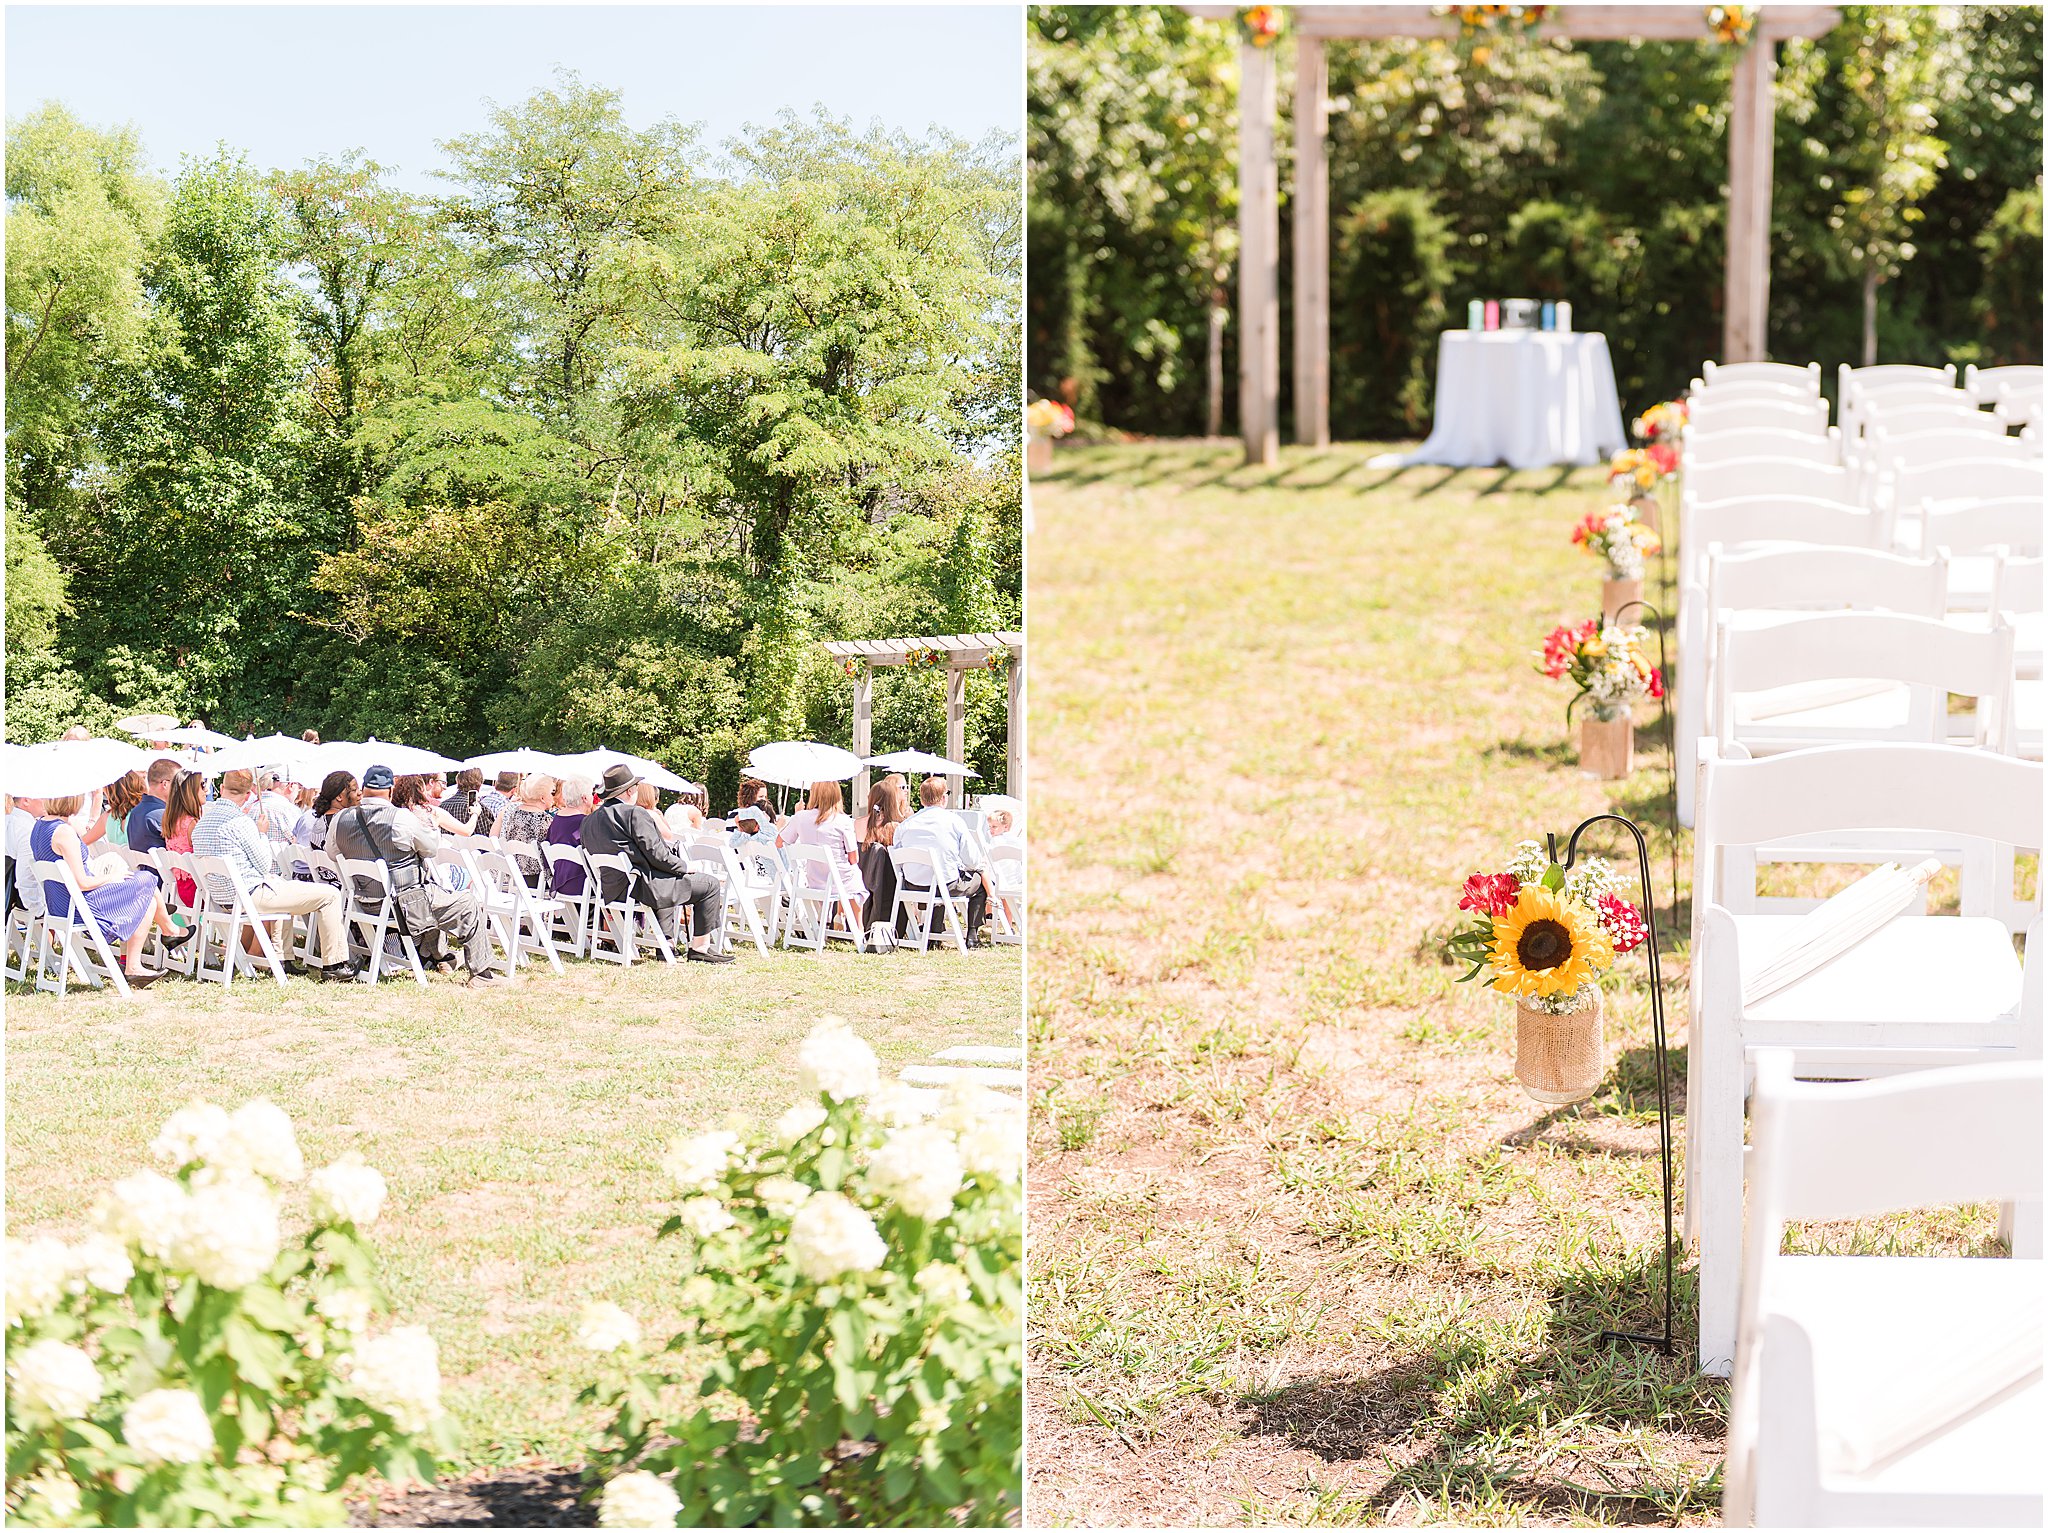 Guest sit under parasols during wedding at The Hawthorns Golf and Country Club